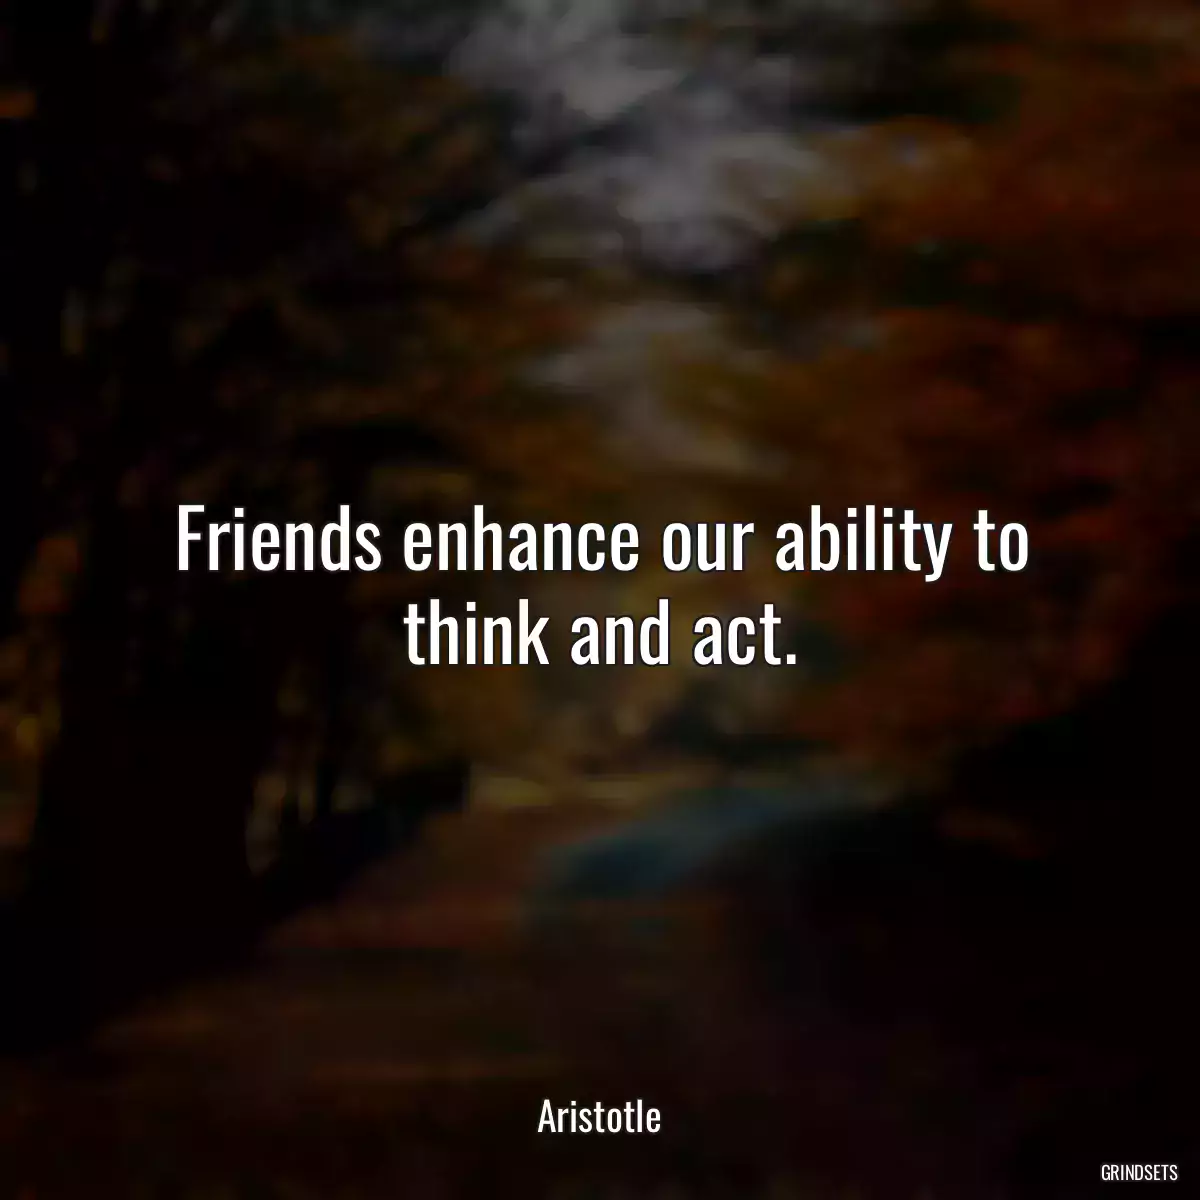 Friends enhance our ability to think and act.